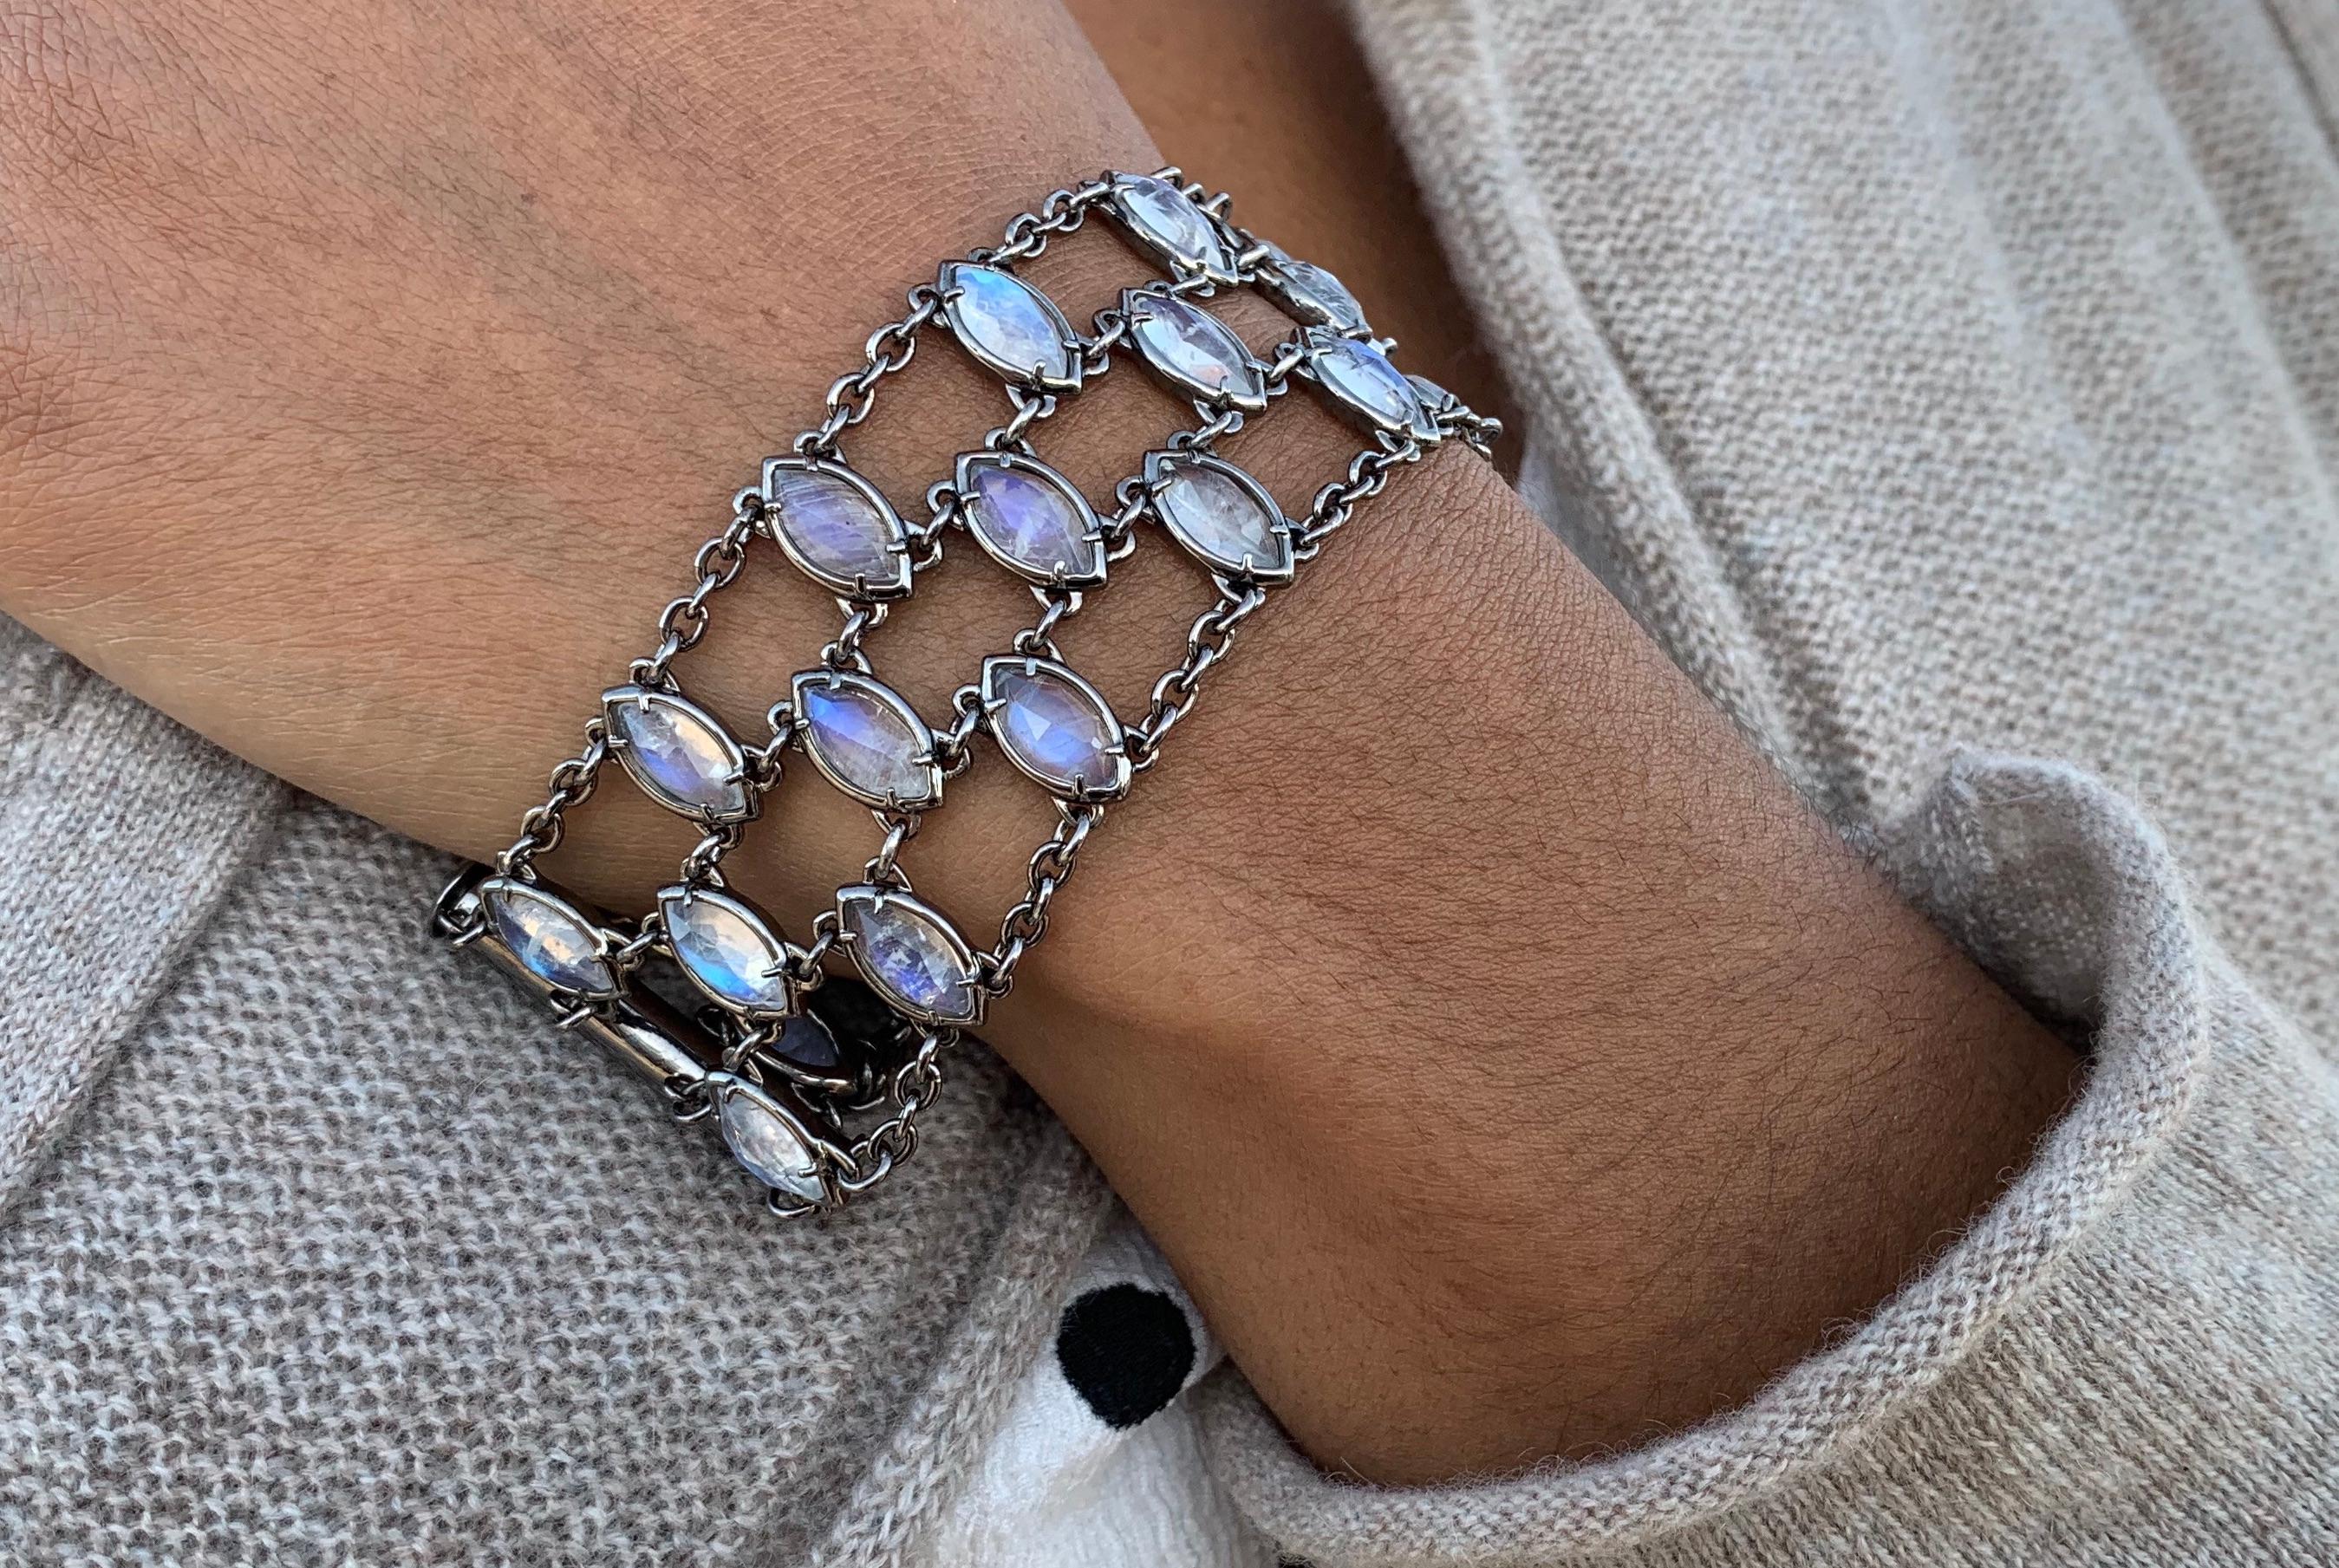 Lively marquise cabochon moonstones are integrated into a superbly sensual bracelet that you won't want to take off.
In sterling silver, this bold 